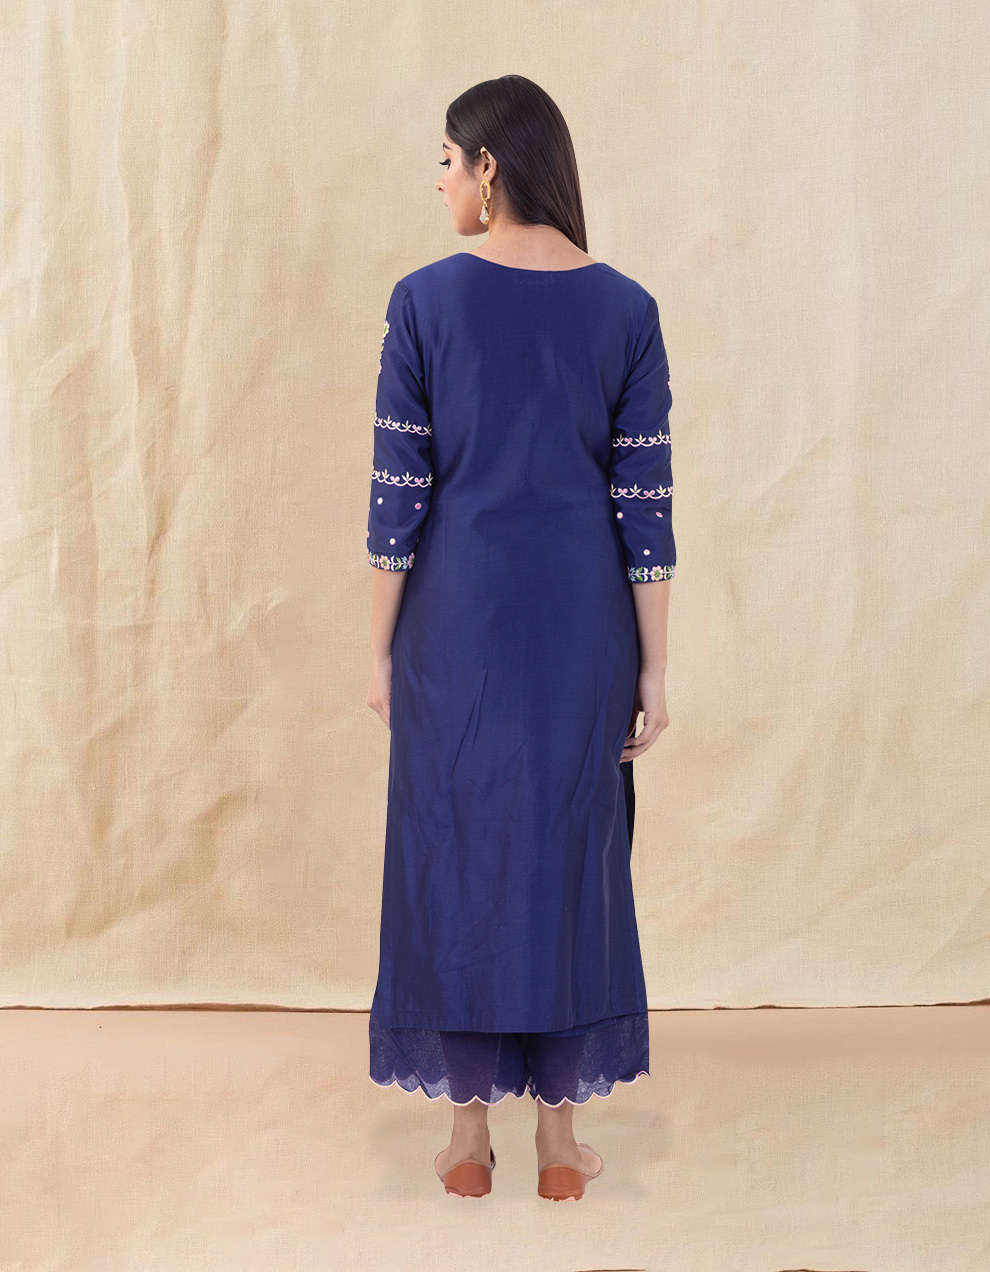 India's-best-blue-silk-kurta-with-silk-palazzo-designers-dress-for-women-online-at-the-best-price-1